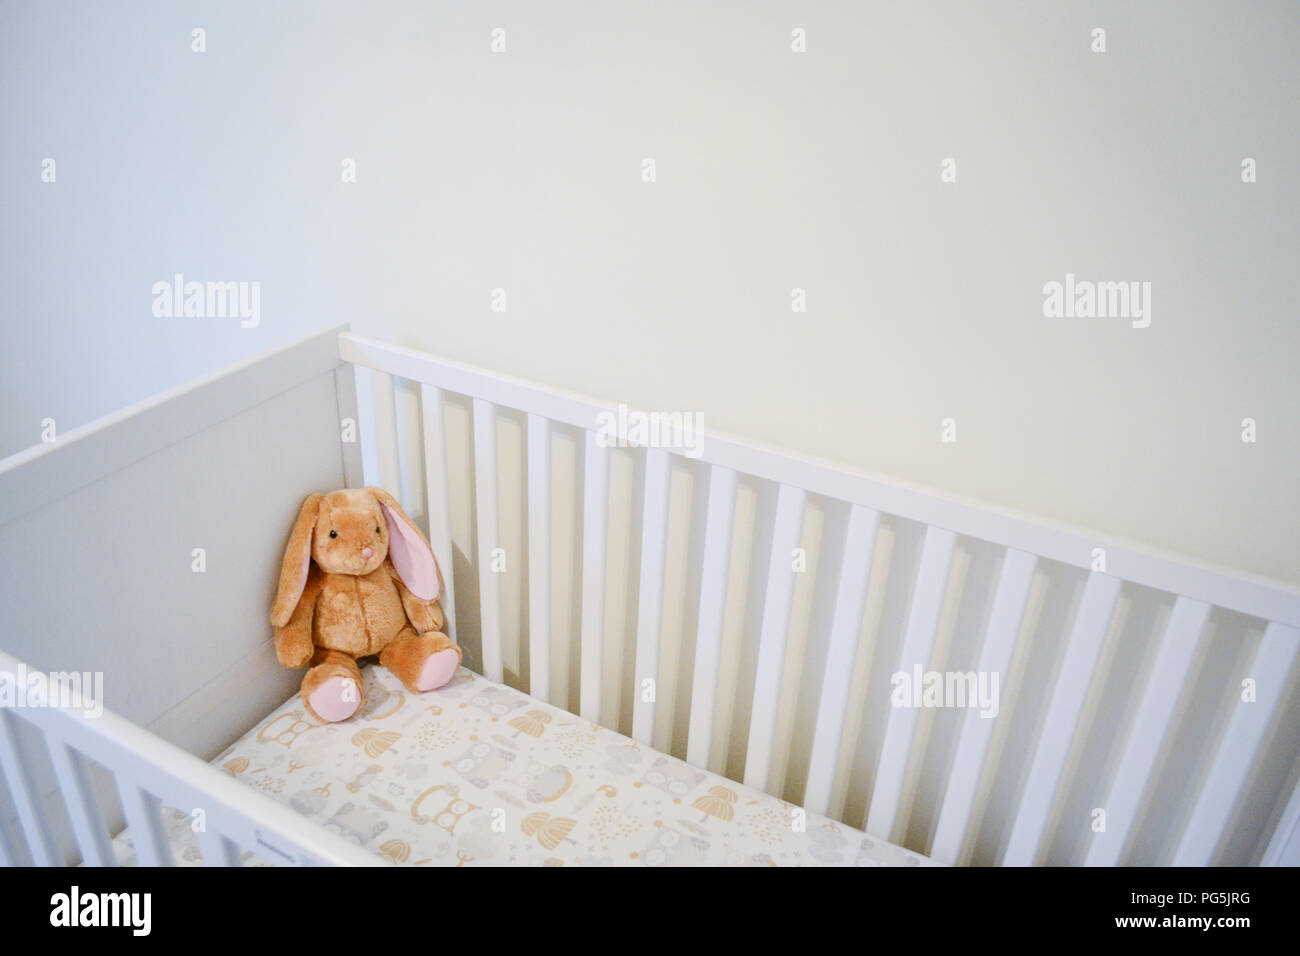 Baby girl's crib. Neutral colors. Owl bed sheet. Ikea SUNDVIK white crib. Converts into a toddler bed. Stuffed animal from Build-A-Bear Workshop. Stock Photo